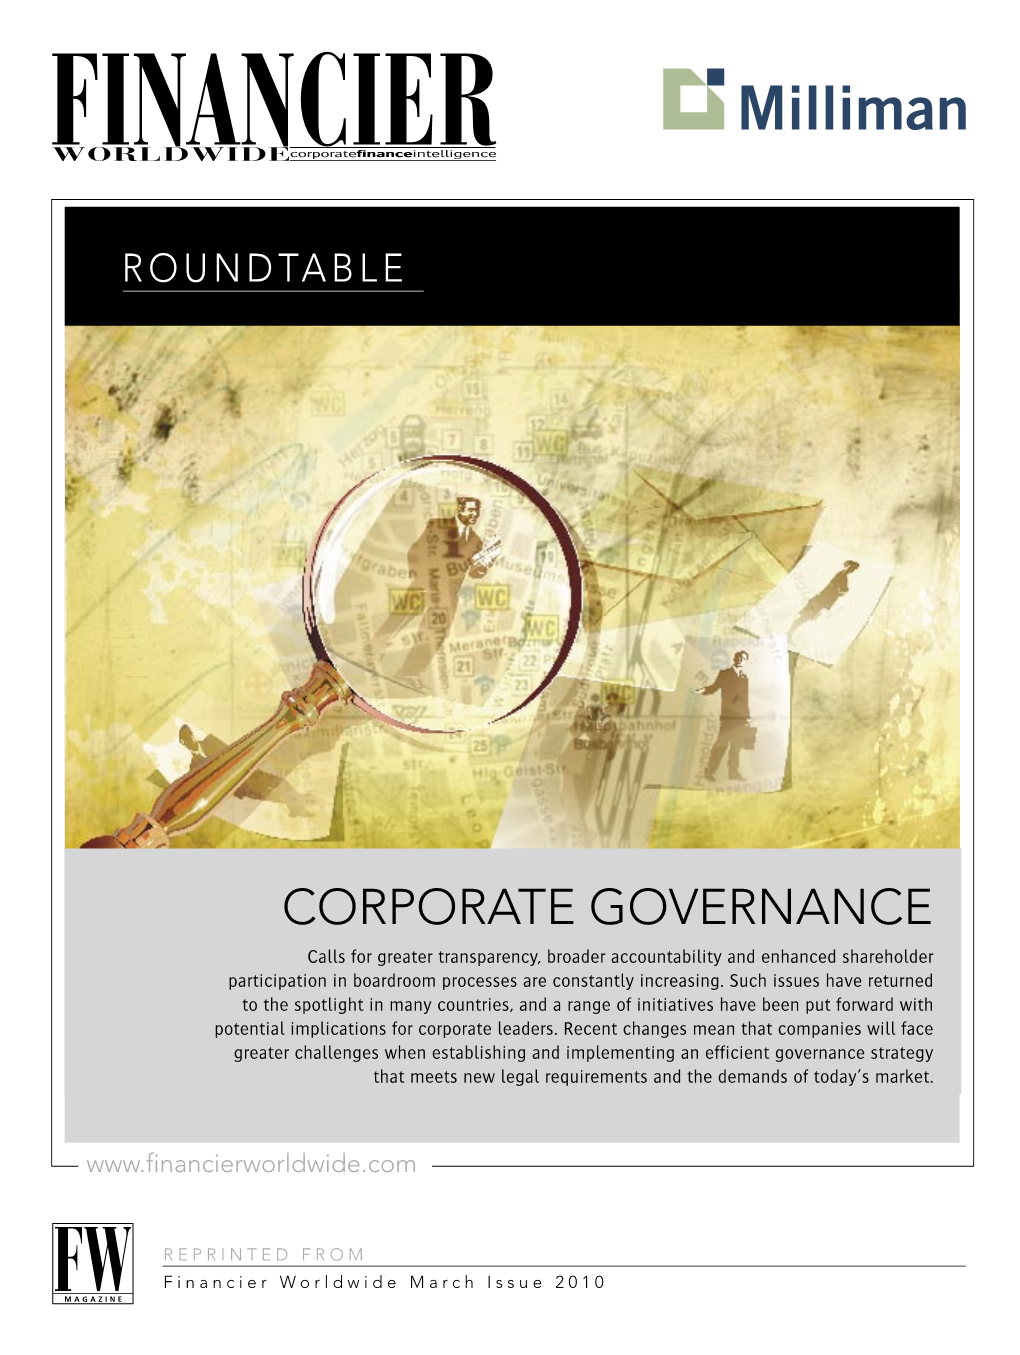 CORPORATE GOVERNANCE Calls for Greater Transparency, Broader Accountability and Enhanced Shareholder Participation in Boardroom Processes Are Constantly Increasing